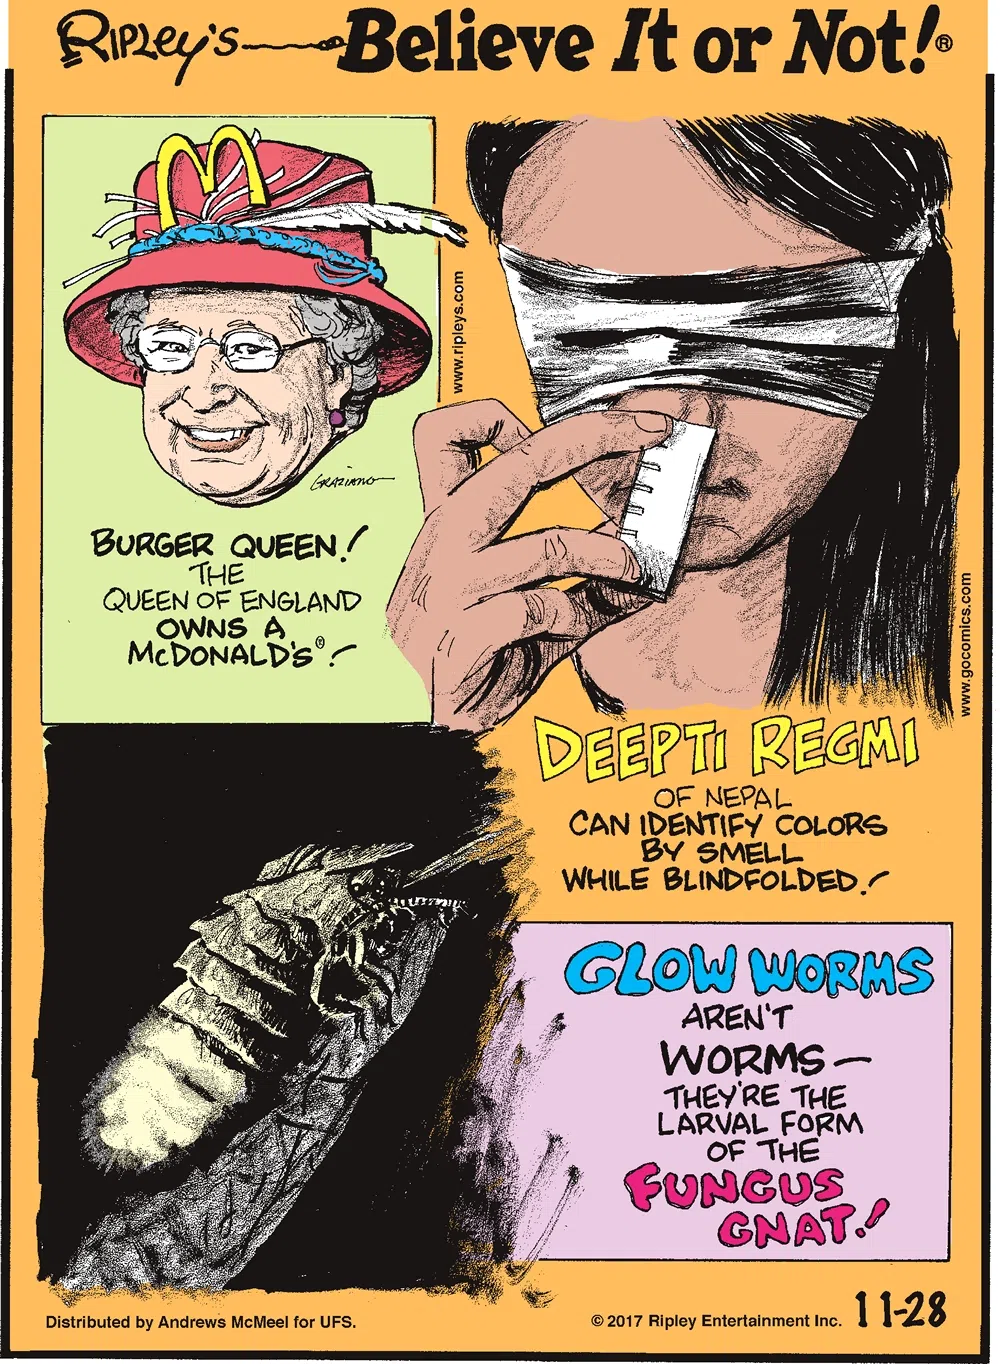 Burger Queen! The Queen of England owns a McDonald's!-------------------- Deepti Regmi of Nepal can identify colors by smell while blindfolded!-------------------- Glow worms aren't worms - they're the larval form of the fungus gnat!